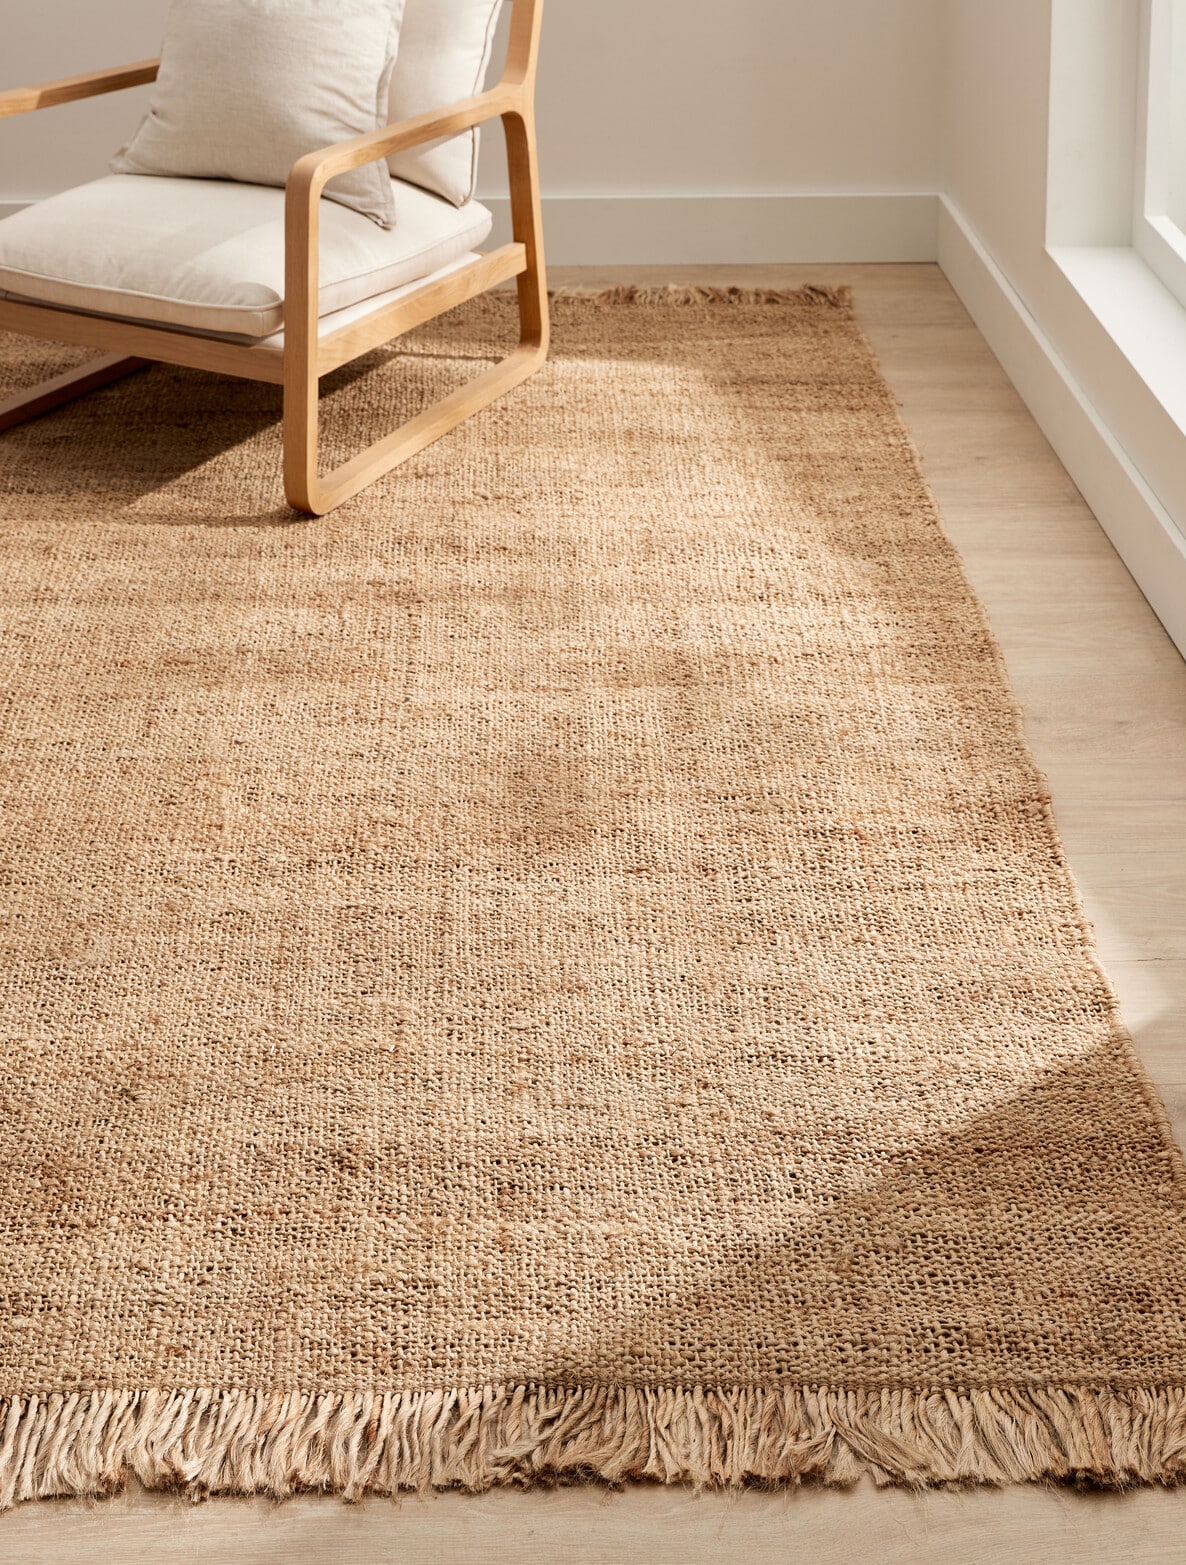 M&Co Woven Jute Rug, Natural, 200x300cm - Rugs